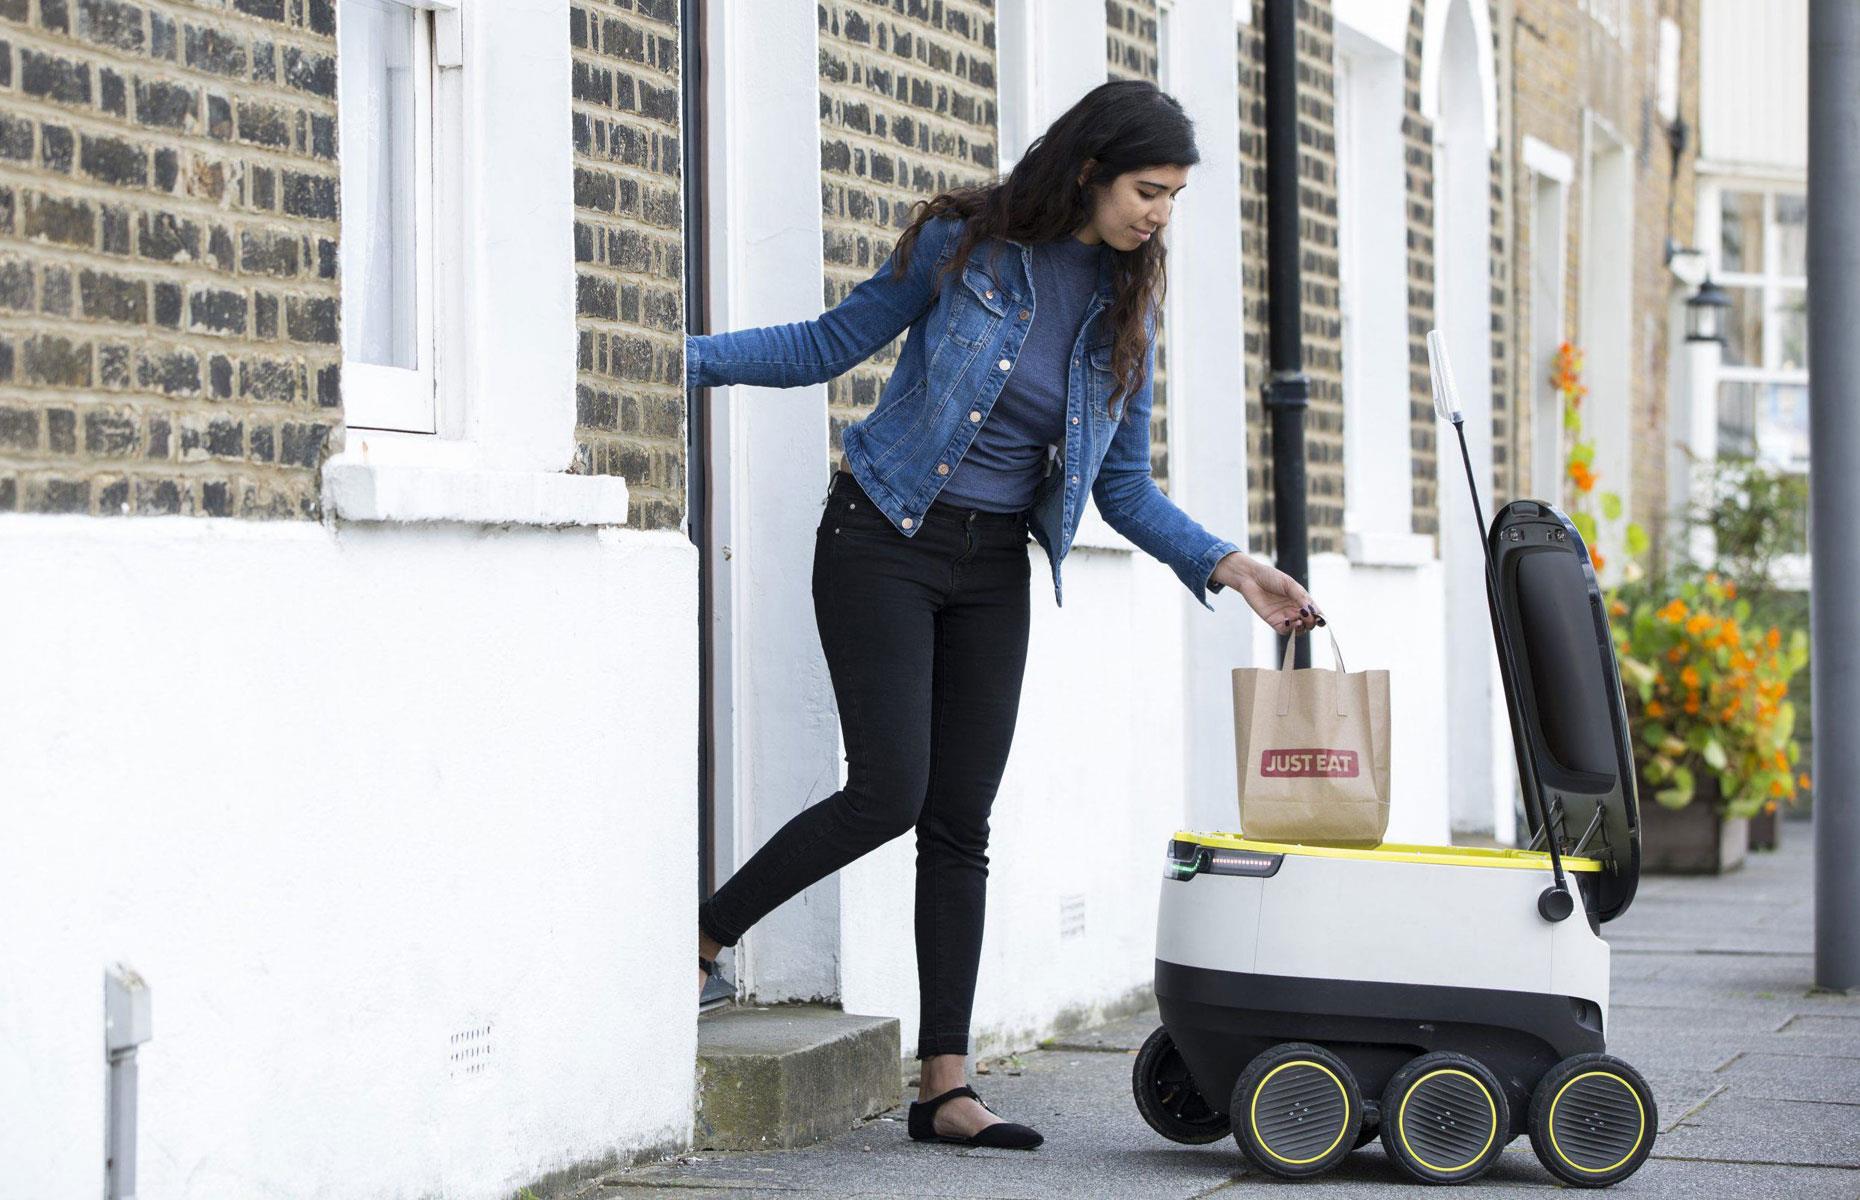 <p>In 2017, online delivery service Just Eat marked an important milestone: the delivery of its 1,000th order by a robot in London. Although the pilot scheme hasn't been widely adopted across the UK just yet, robots are steadily replacing delivery drivers all around the world.</p>  <p>Since November 2020, for example, Amazon has been using its Amazon Scout robots to deliver packages in Washington, California, Georgia, and Tennessee. </p>